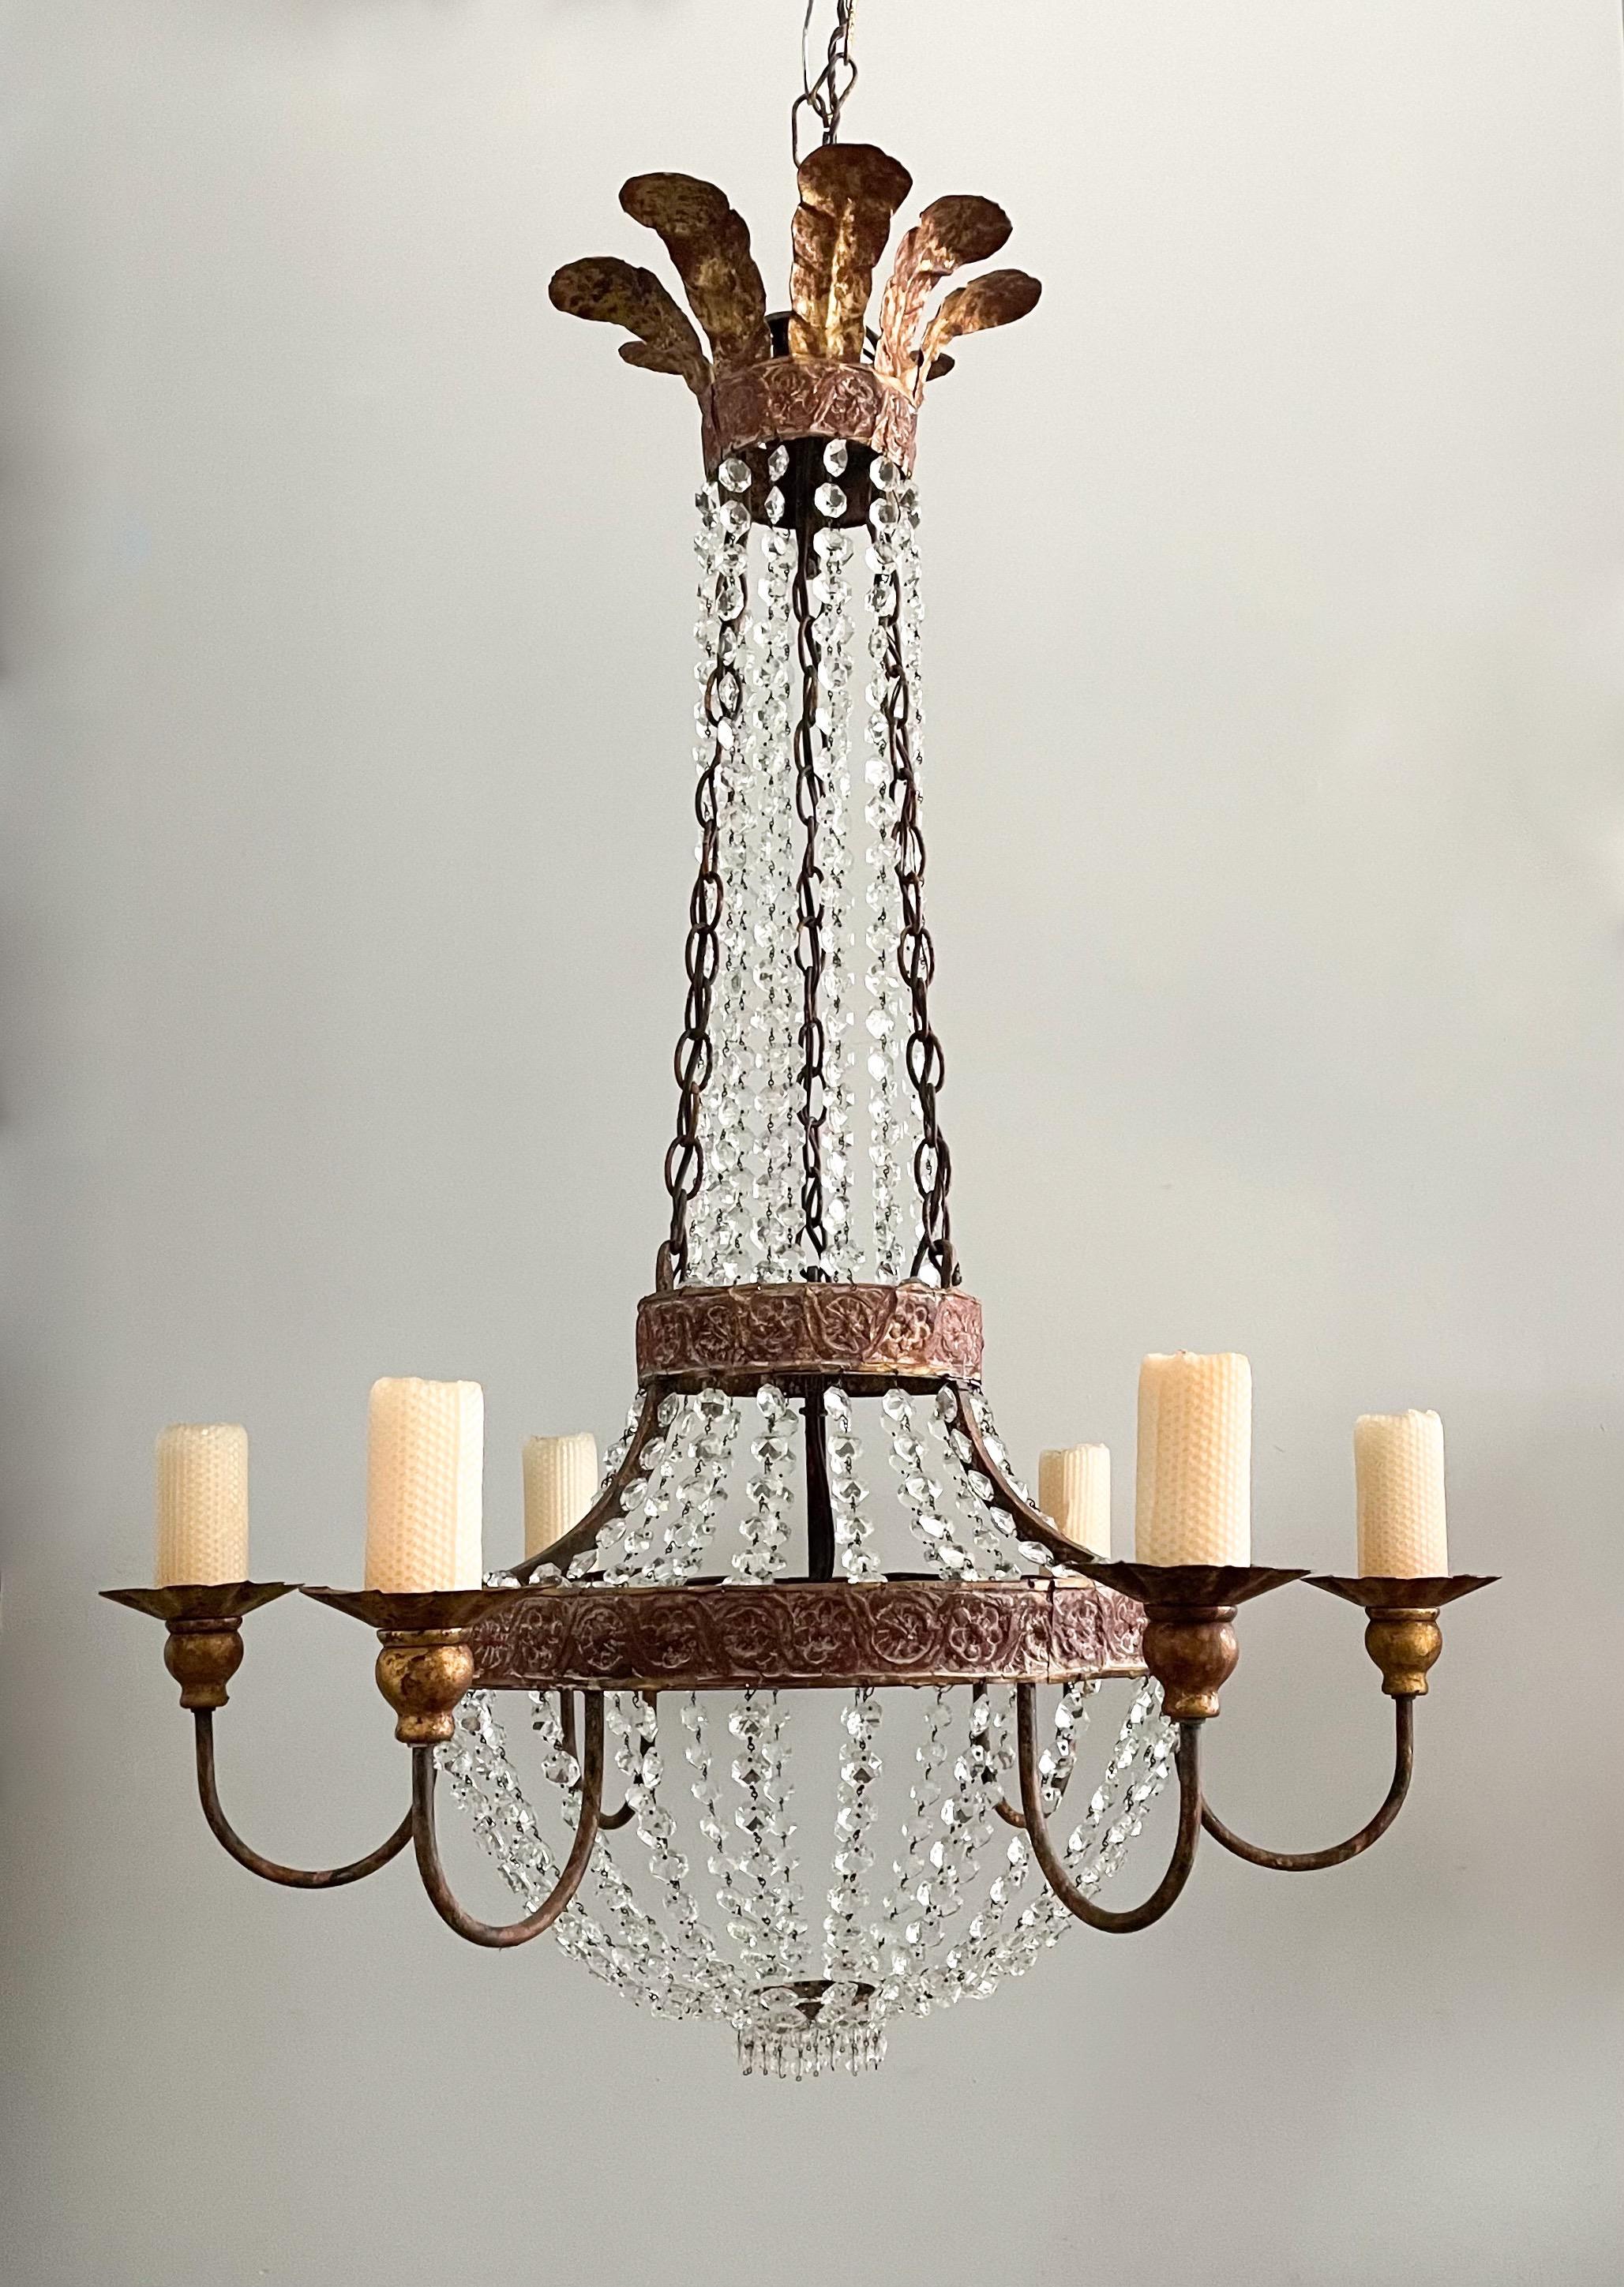 Graceful, iron and crystal chandelier in the Empire style by Niermann Weeks.

The chandelier features a painted iron repoussé frame with a gilded plume crown at top and is decorated with faceted crystal beads. 

The chandelier is wired and in